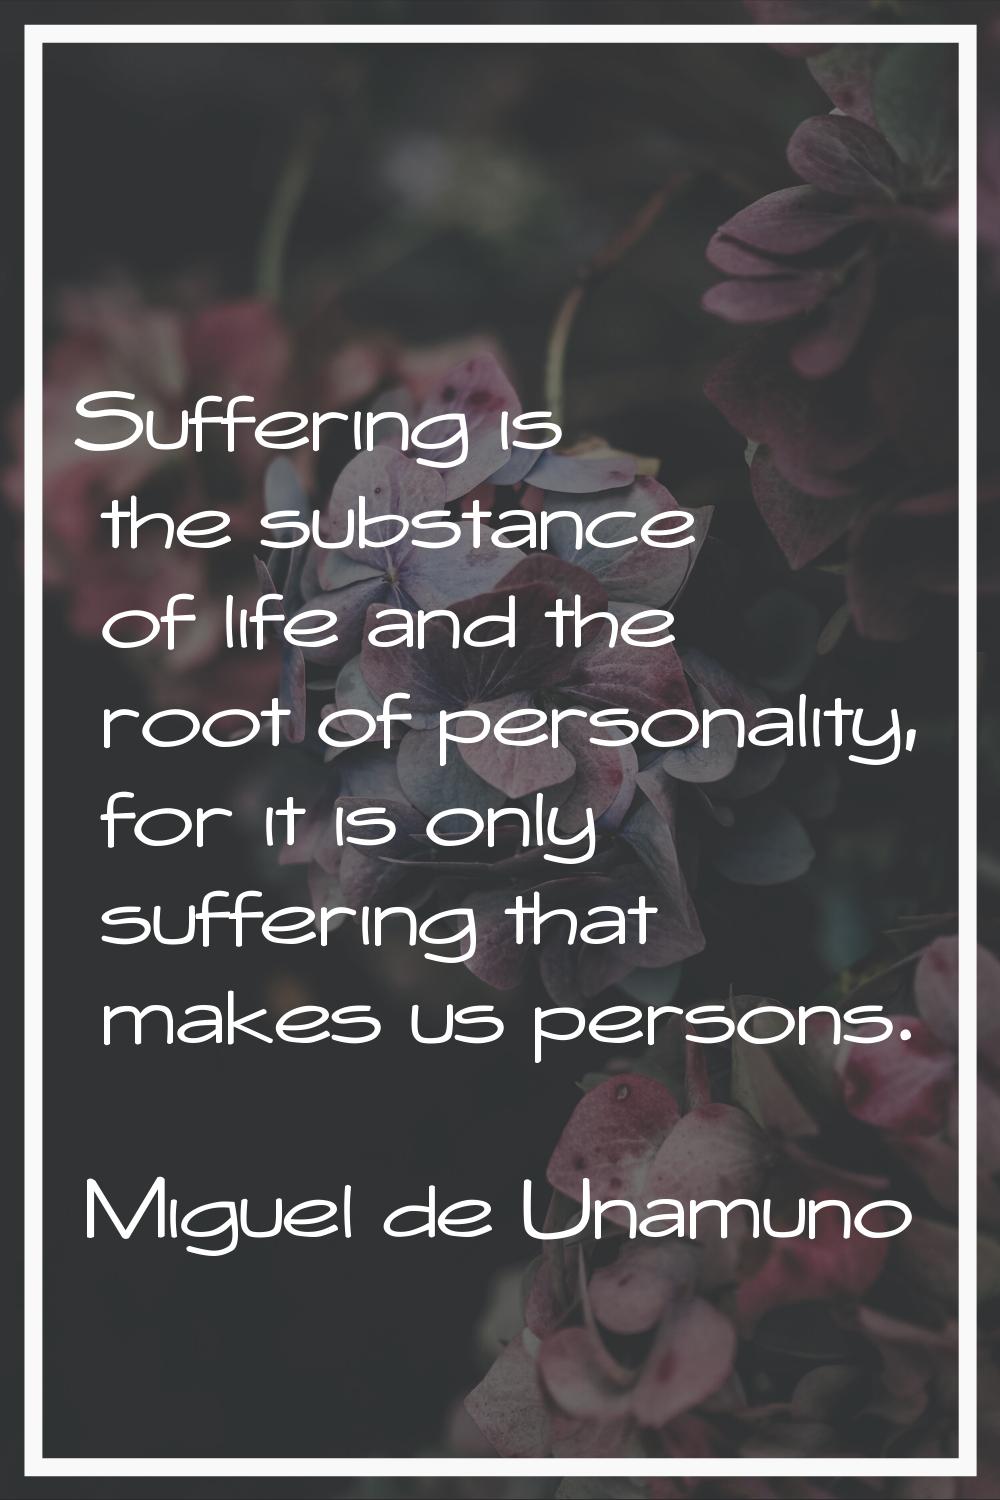 Suffering is the substance of life and the root of personality, for it is only suffering that makes